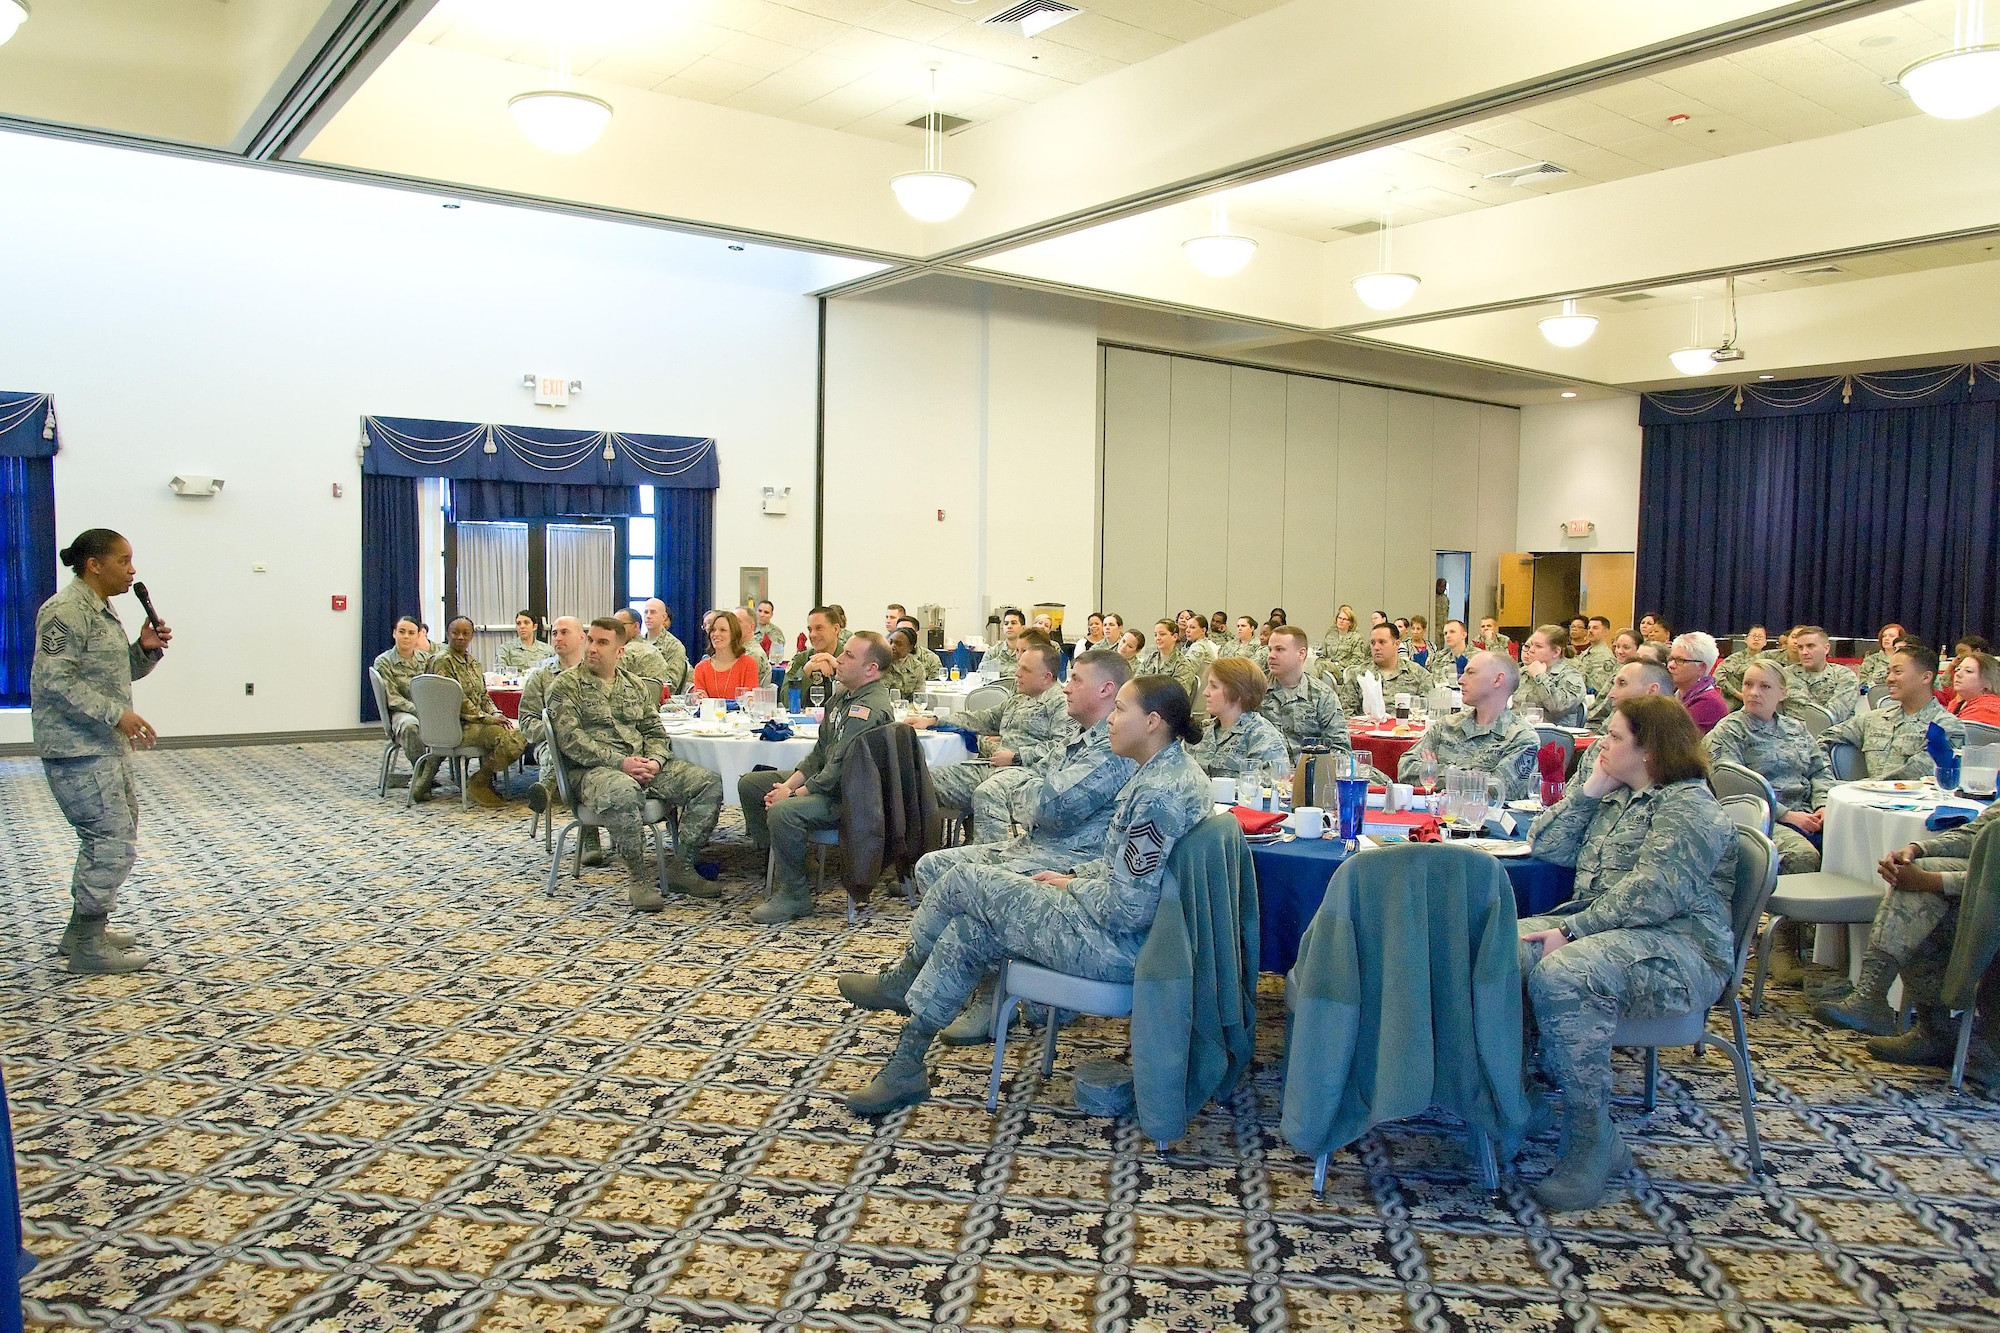 Team Dover members listen to Chief Master Sgt. Shelina Frey, command chief for Air Mobility Command, Scott Air Force Base, Ill., speak at the Women’s History Month Breakfast, March 20, 2017, at The Landings on Dover Air Force Base, Del. Frey was the guest speaker for the event and noted the importance of her having good mentors during her Air Force career. (U.S. Air Force photo by Roland Balik)